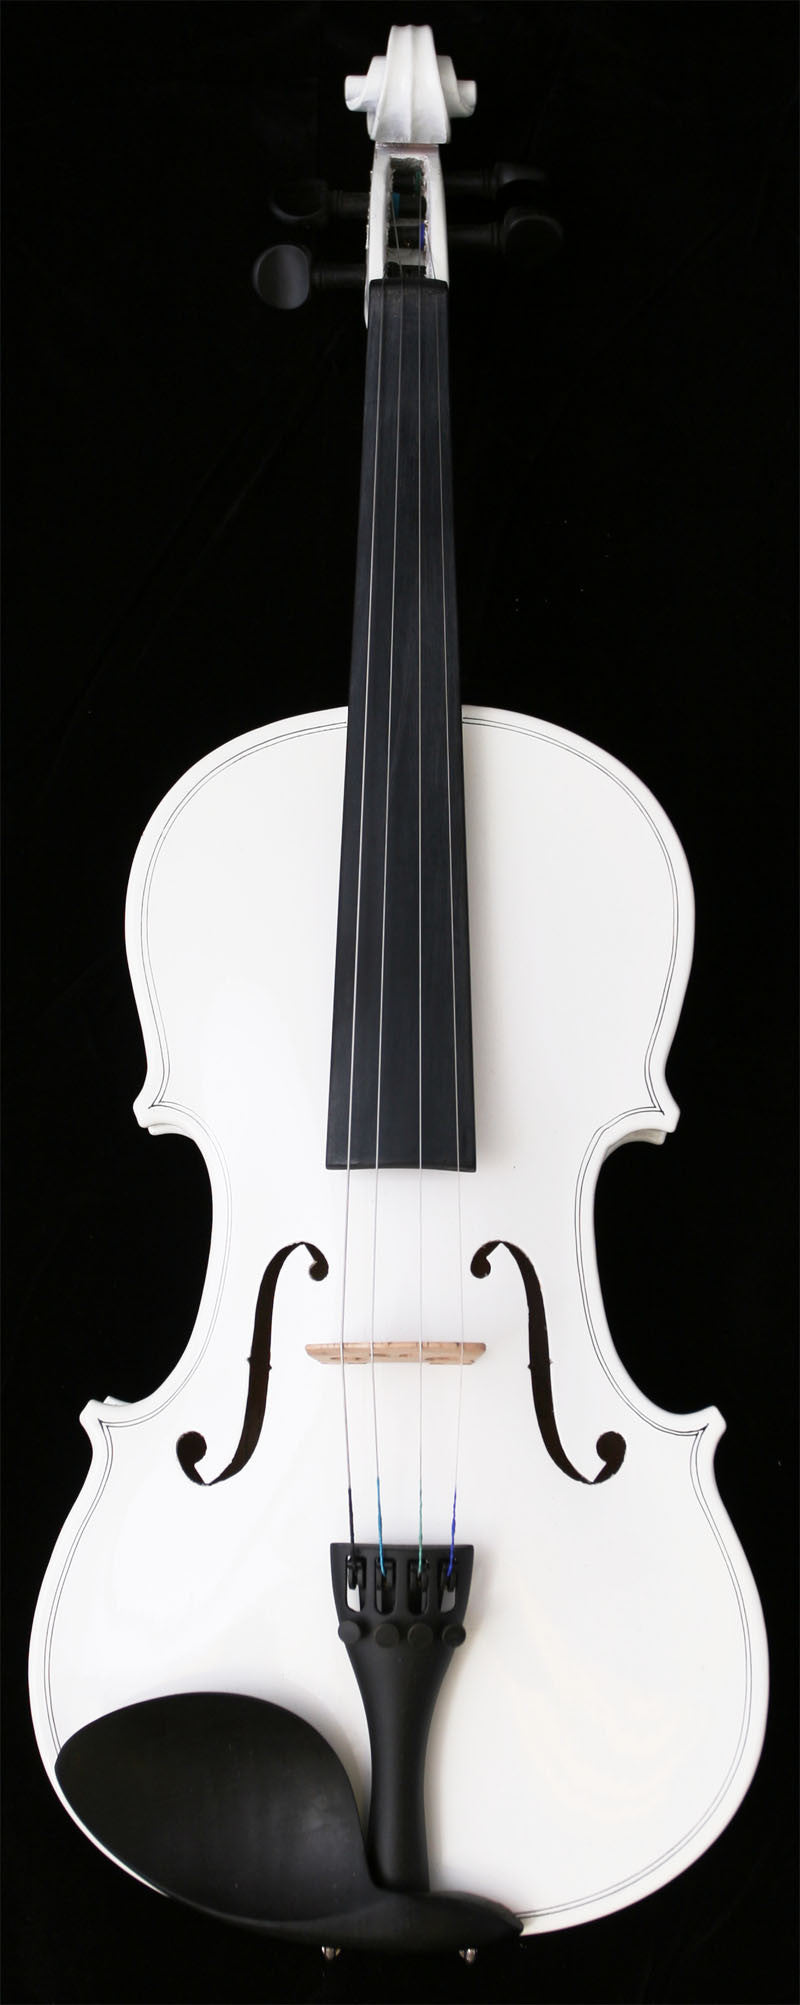 Crescent Direct Vl-wt1/2 1/2 White Maplewood Acoustic Violin With Case, Rosin, And Bow